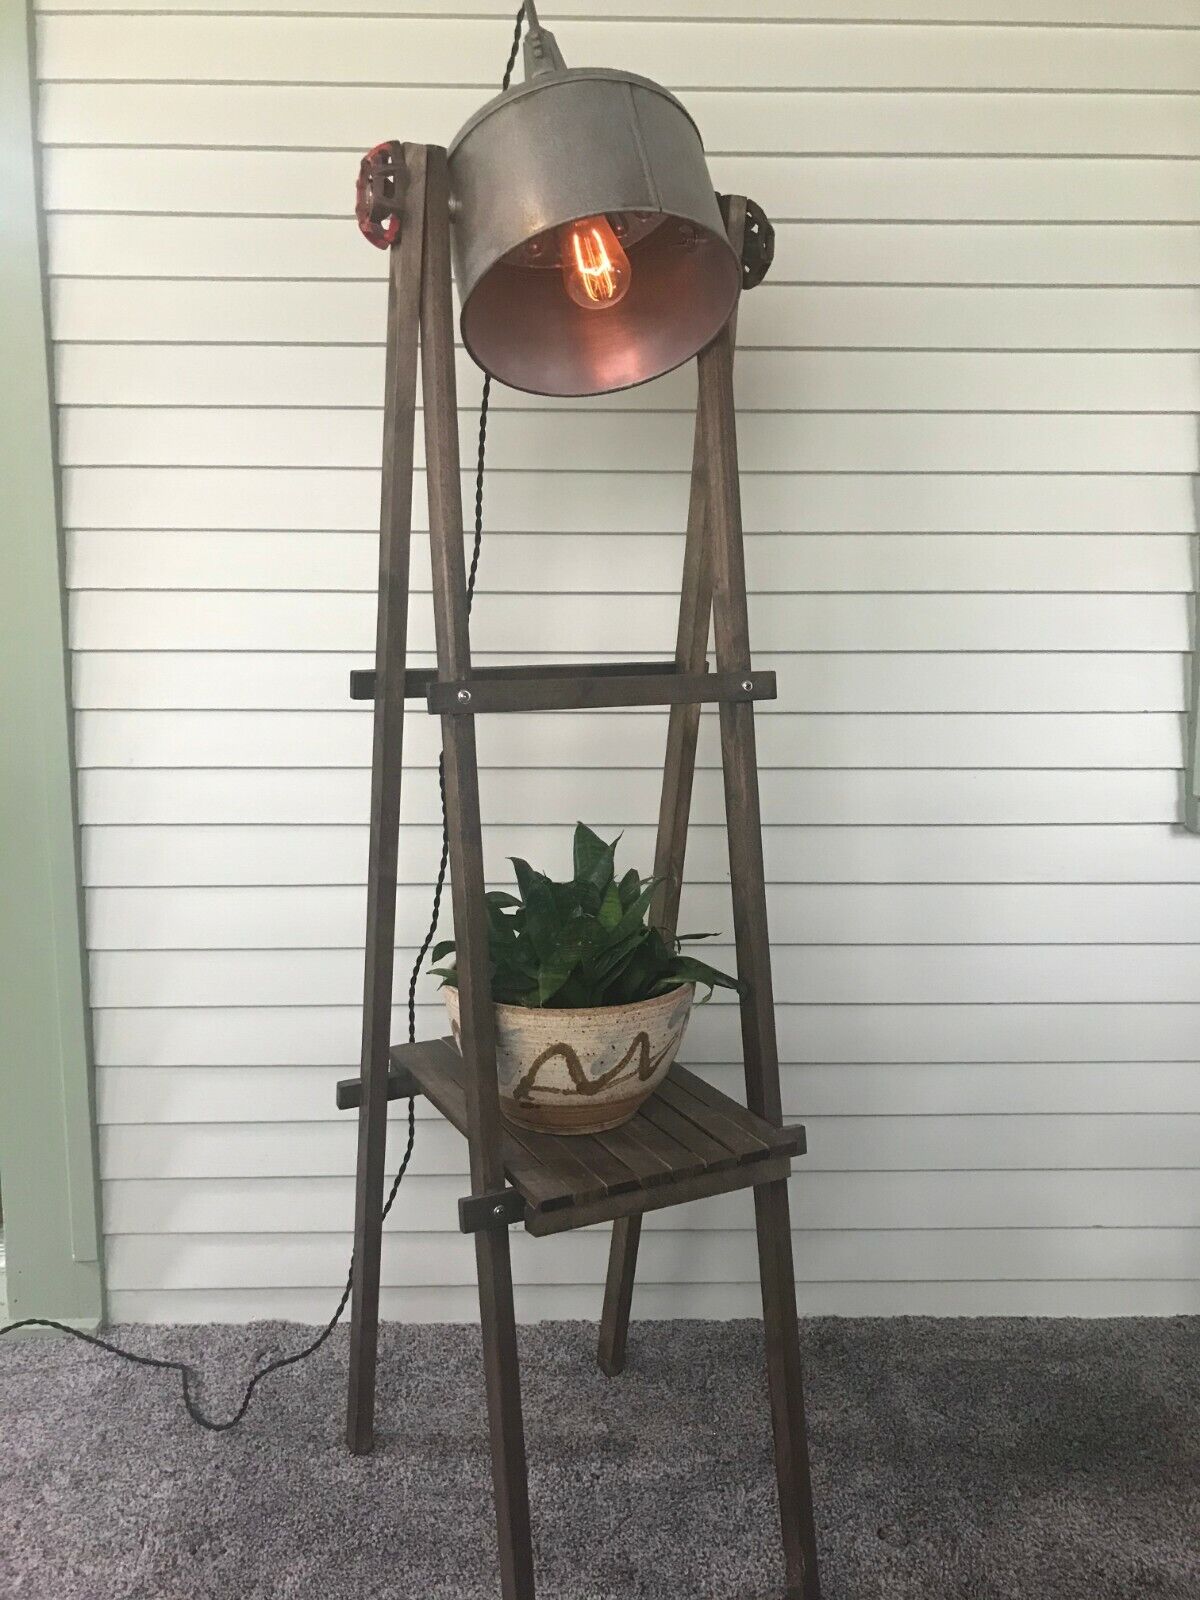 VINTAGE GALVANIZED FUNNEL plant stand lamp, upcycled shabby sheek